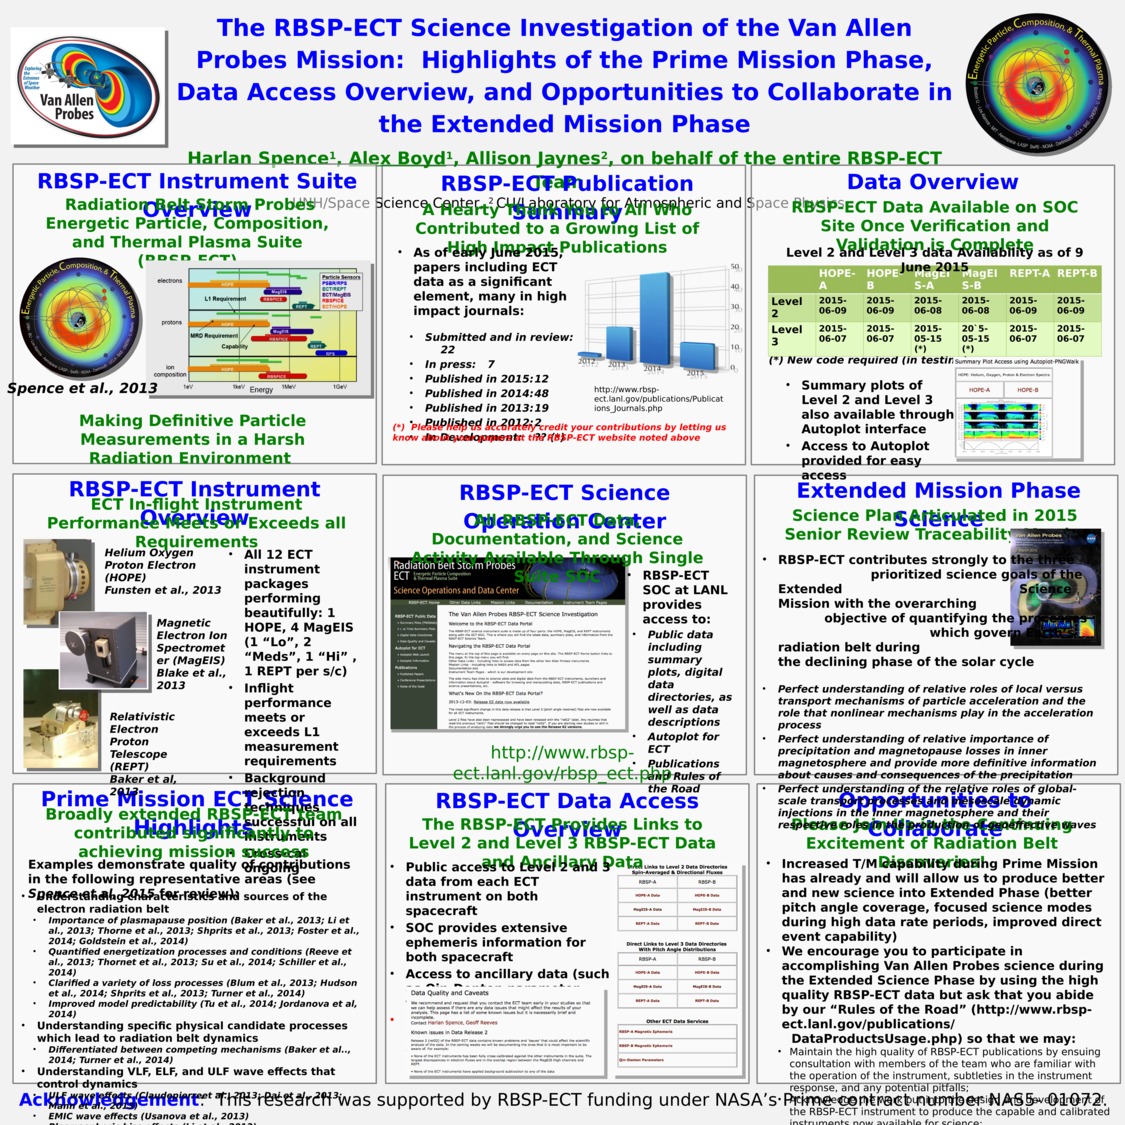 The Rbsp-Ect Science Investigation Of The Van Allen Probes Mission: Highlights Of The Prime Mission Phase, Data Access Overview, And Opportunities To Collaborate In The Extended Mission Phase by hspence